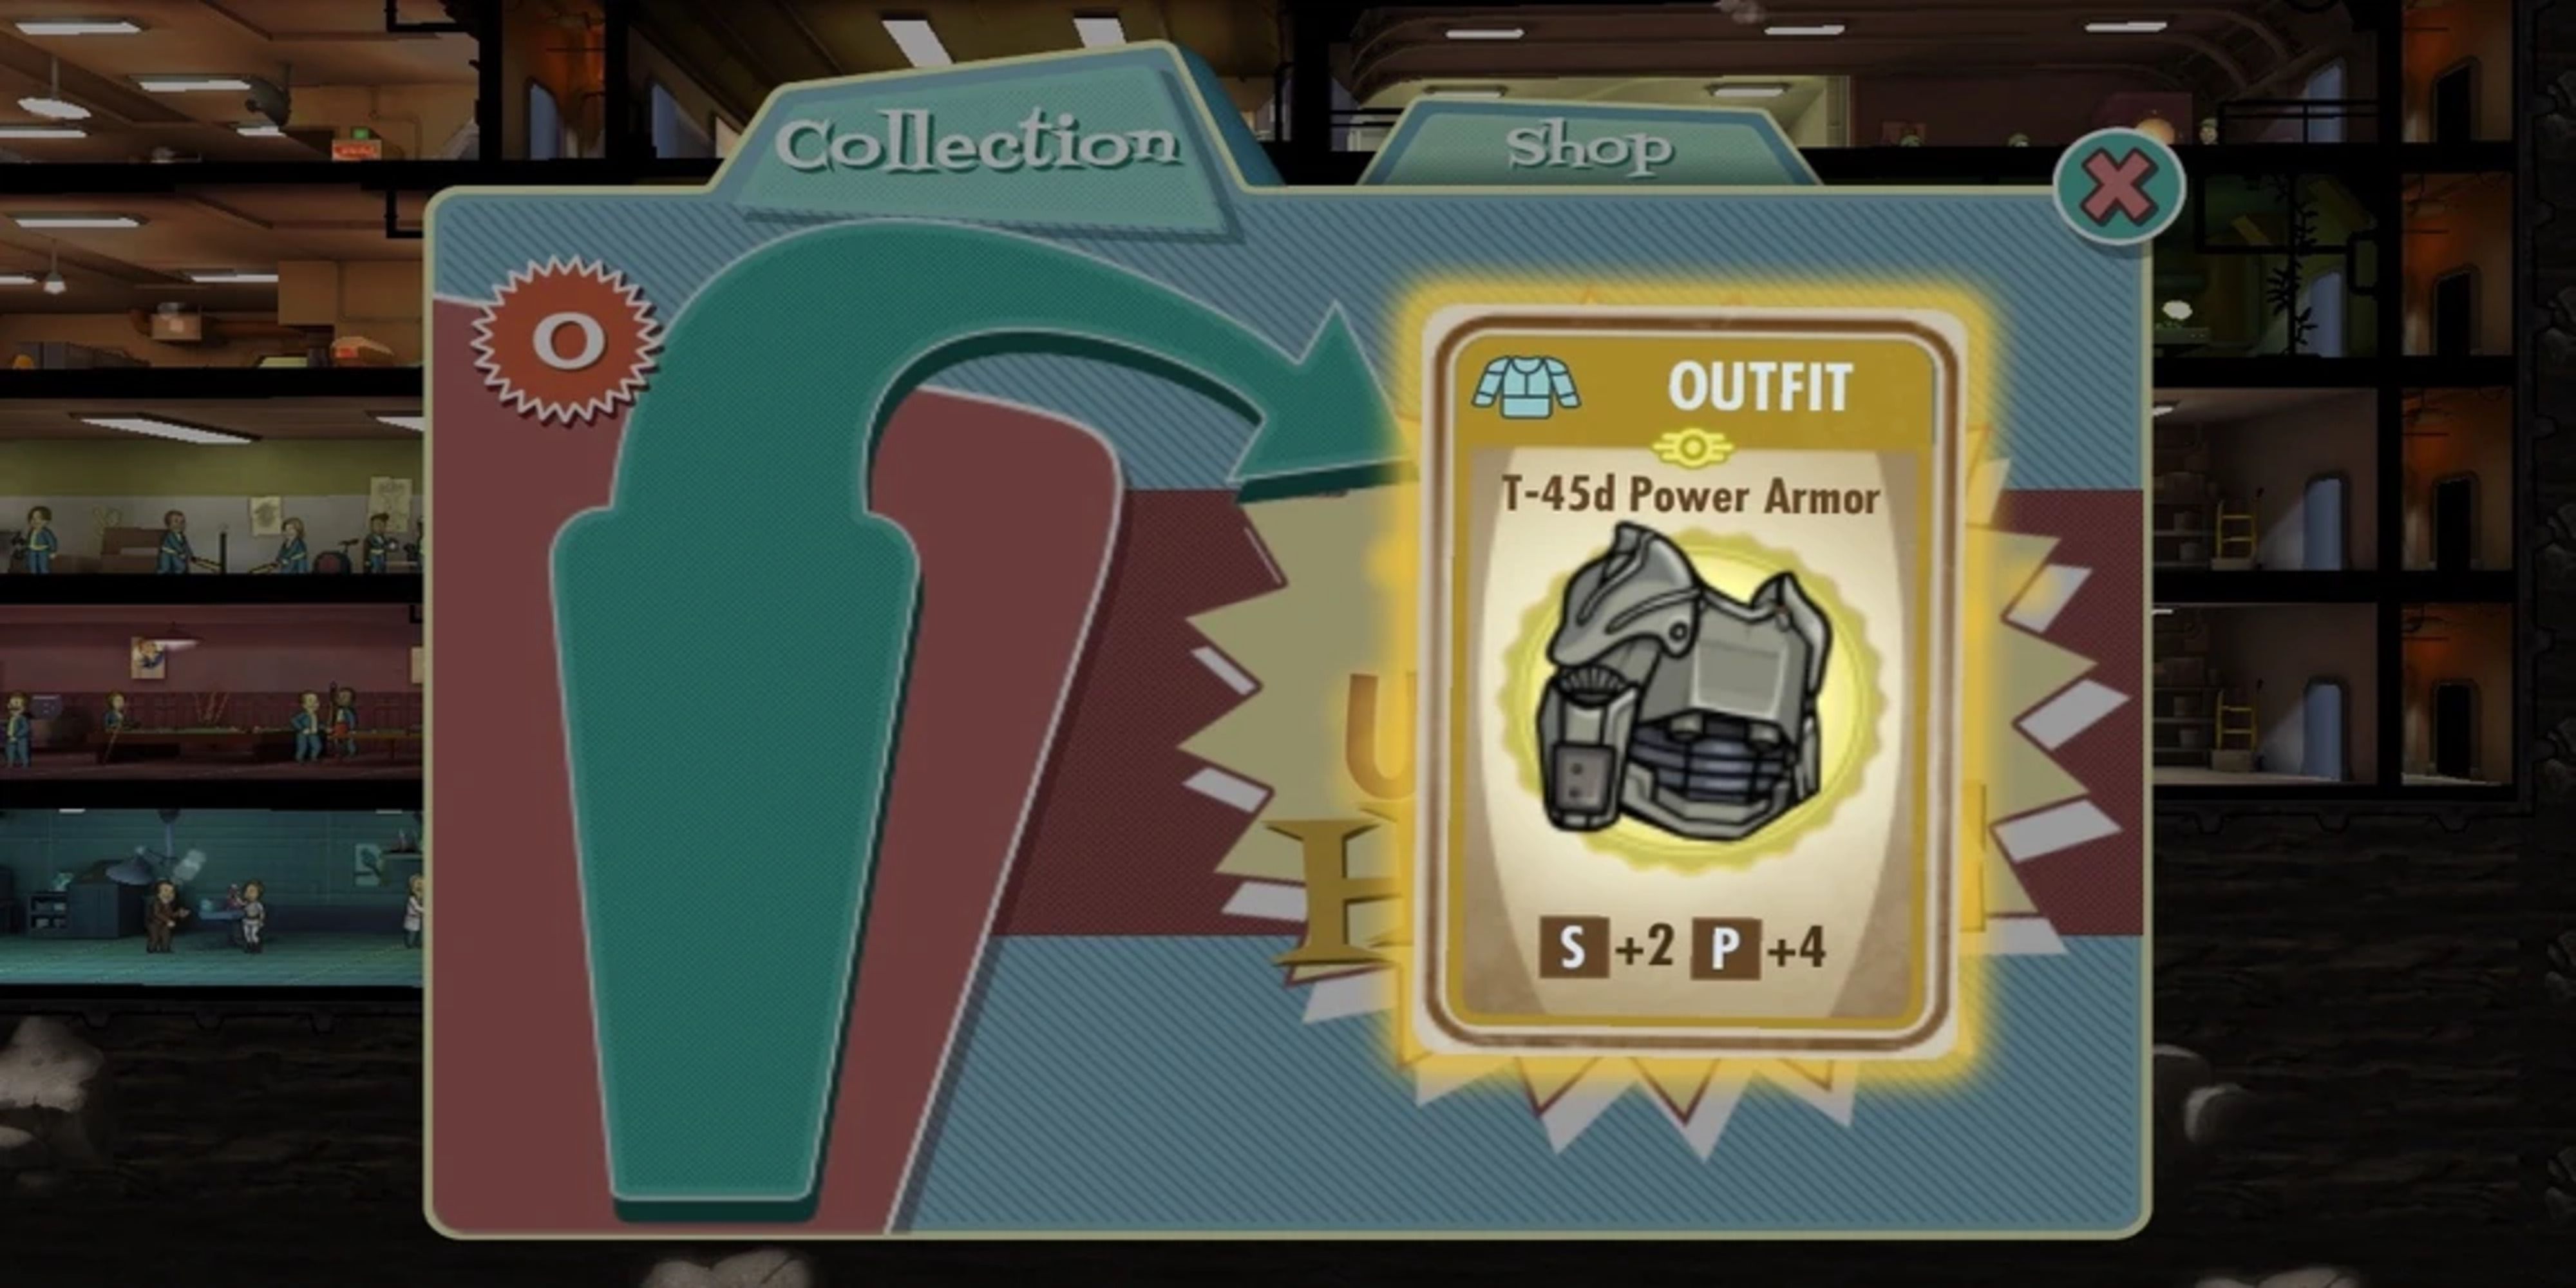 Unlocking the T-45d Power Armor outfit from a Lunchbox in Fallout Shelter.